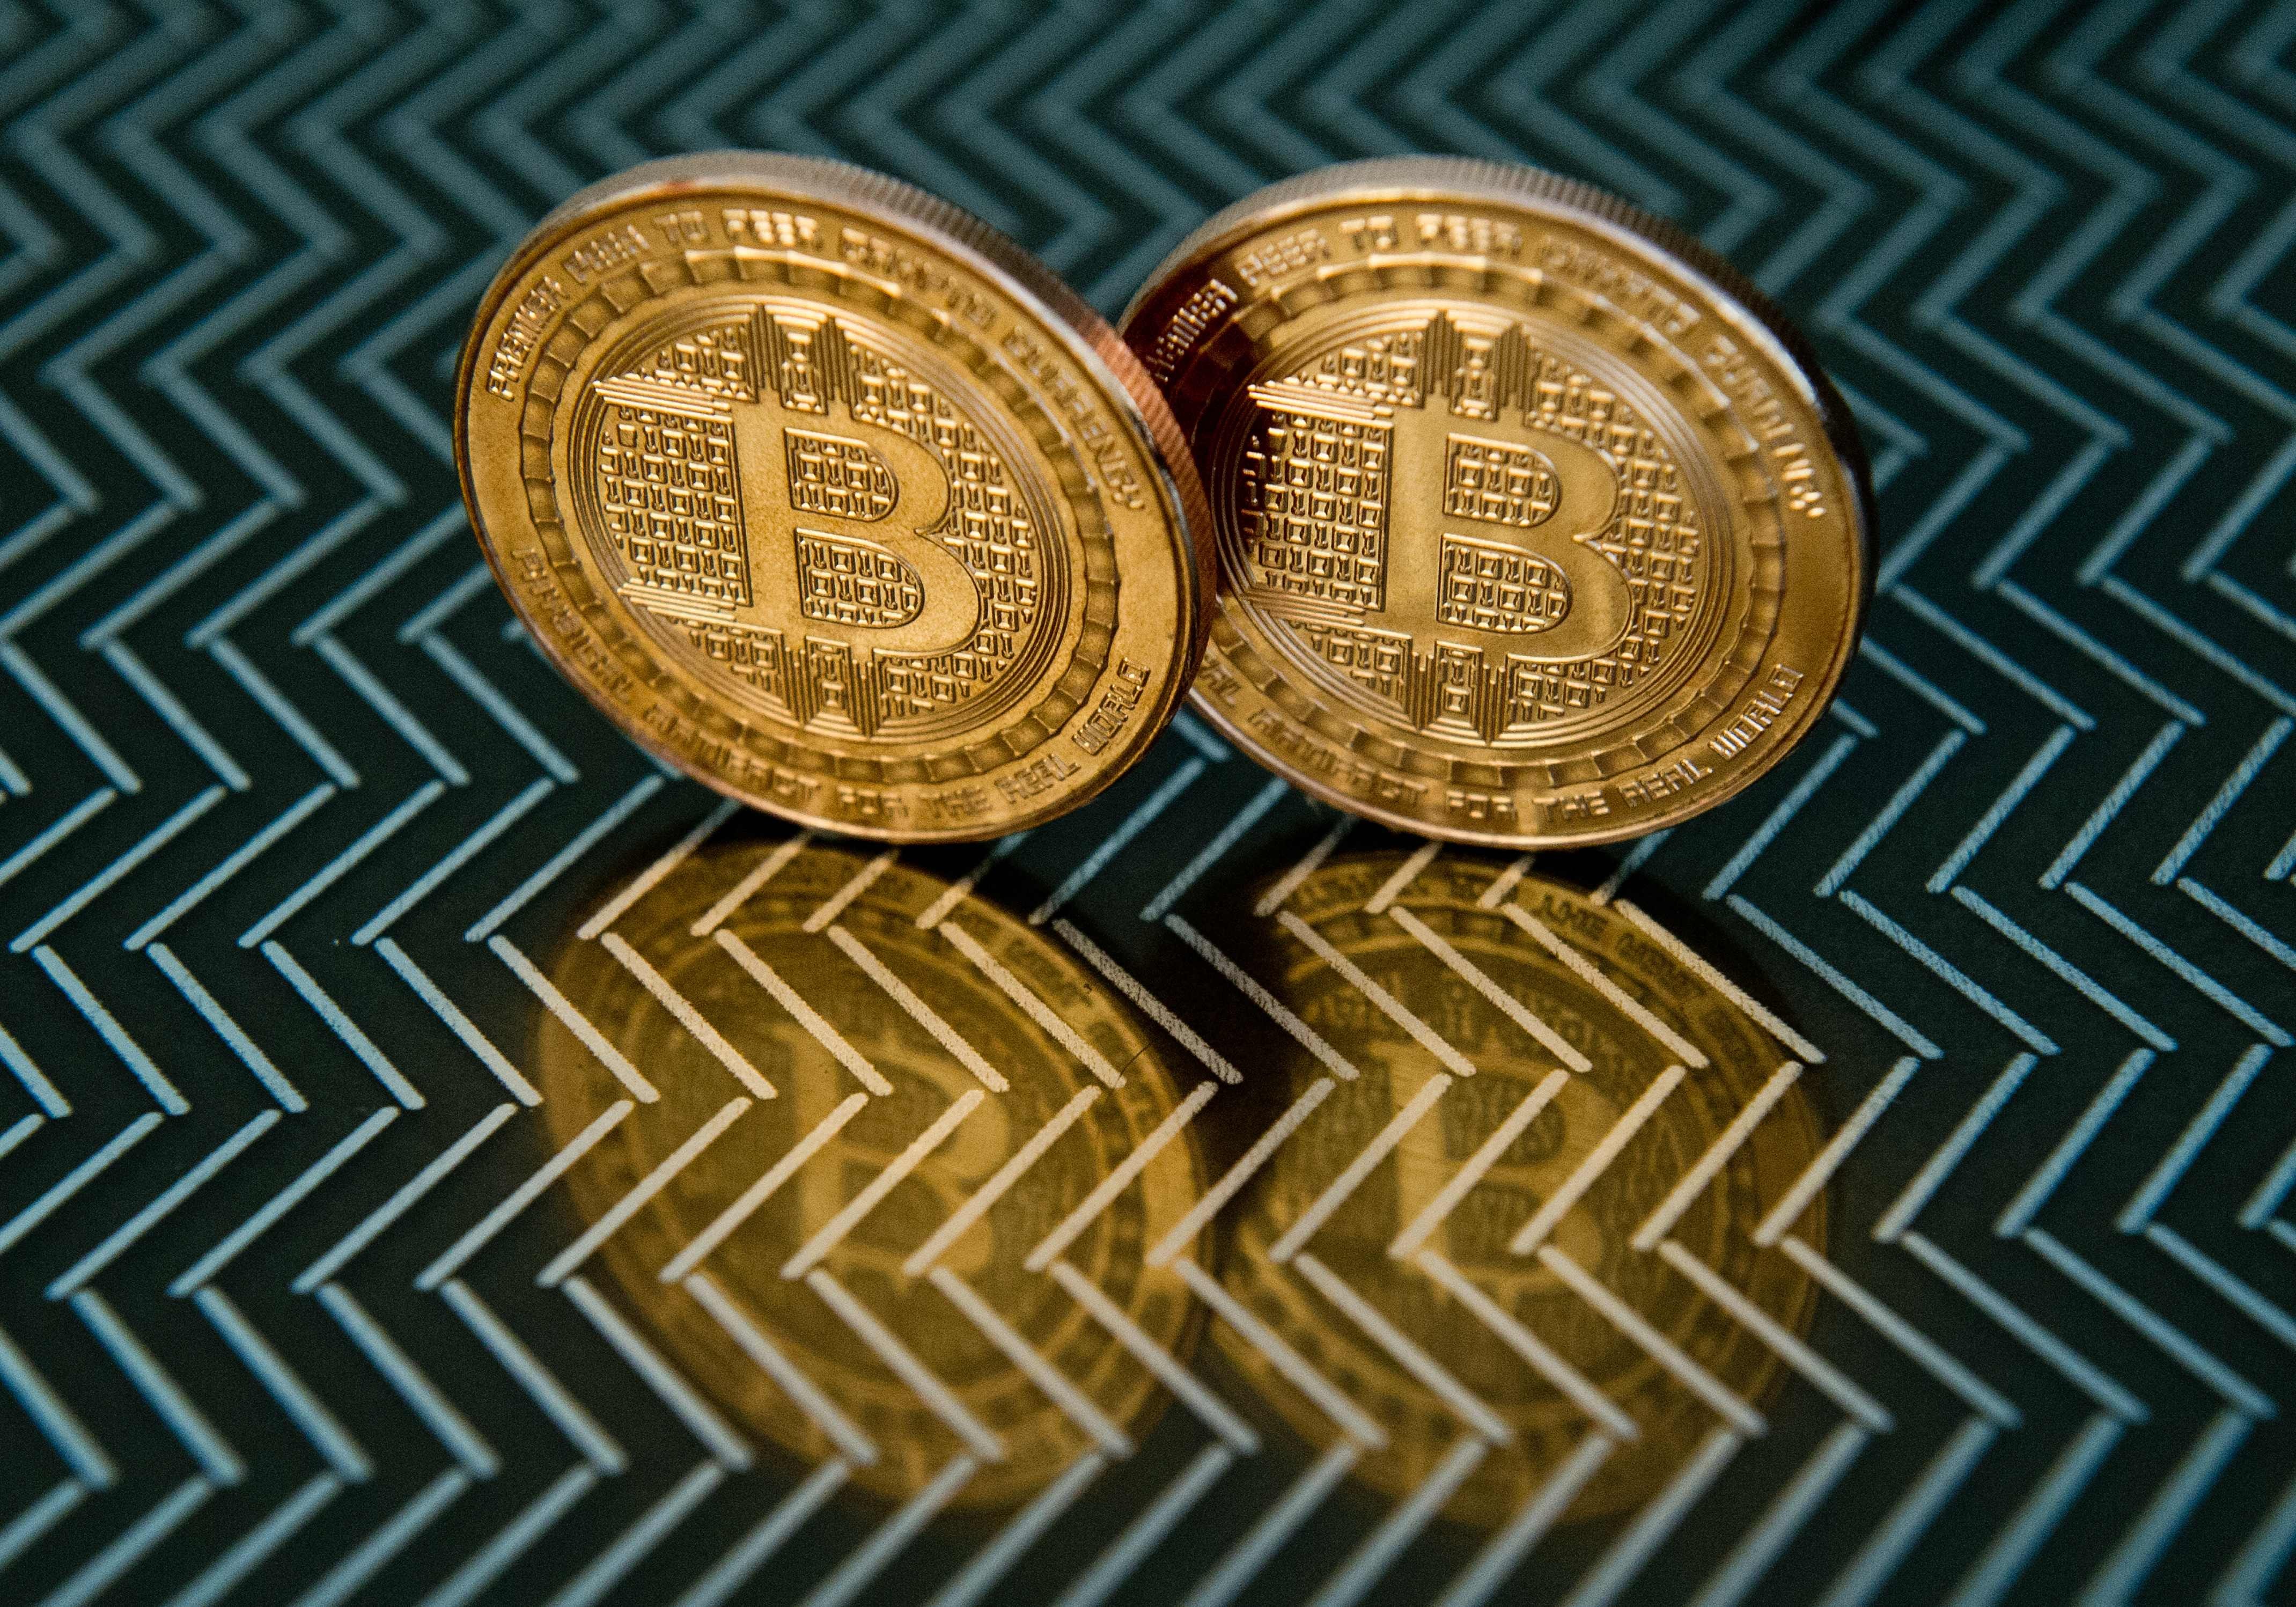 Beijing has clamped down on trading in bitcoin and other cryptocurrencies. Photo: AFP